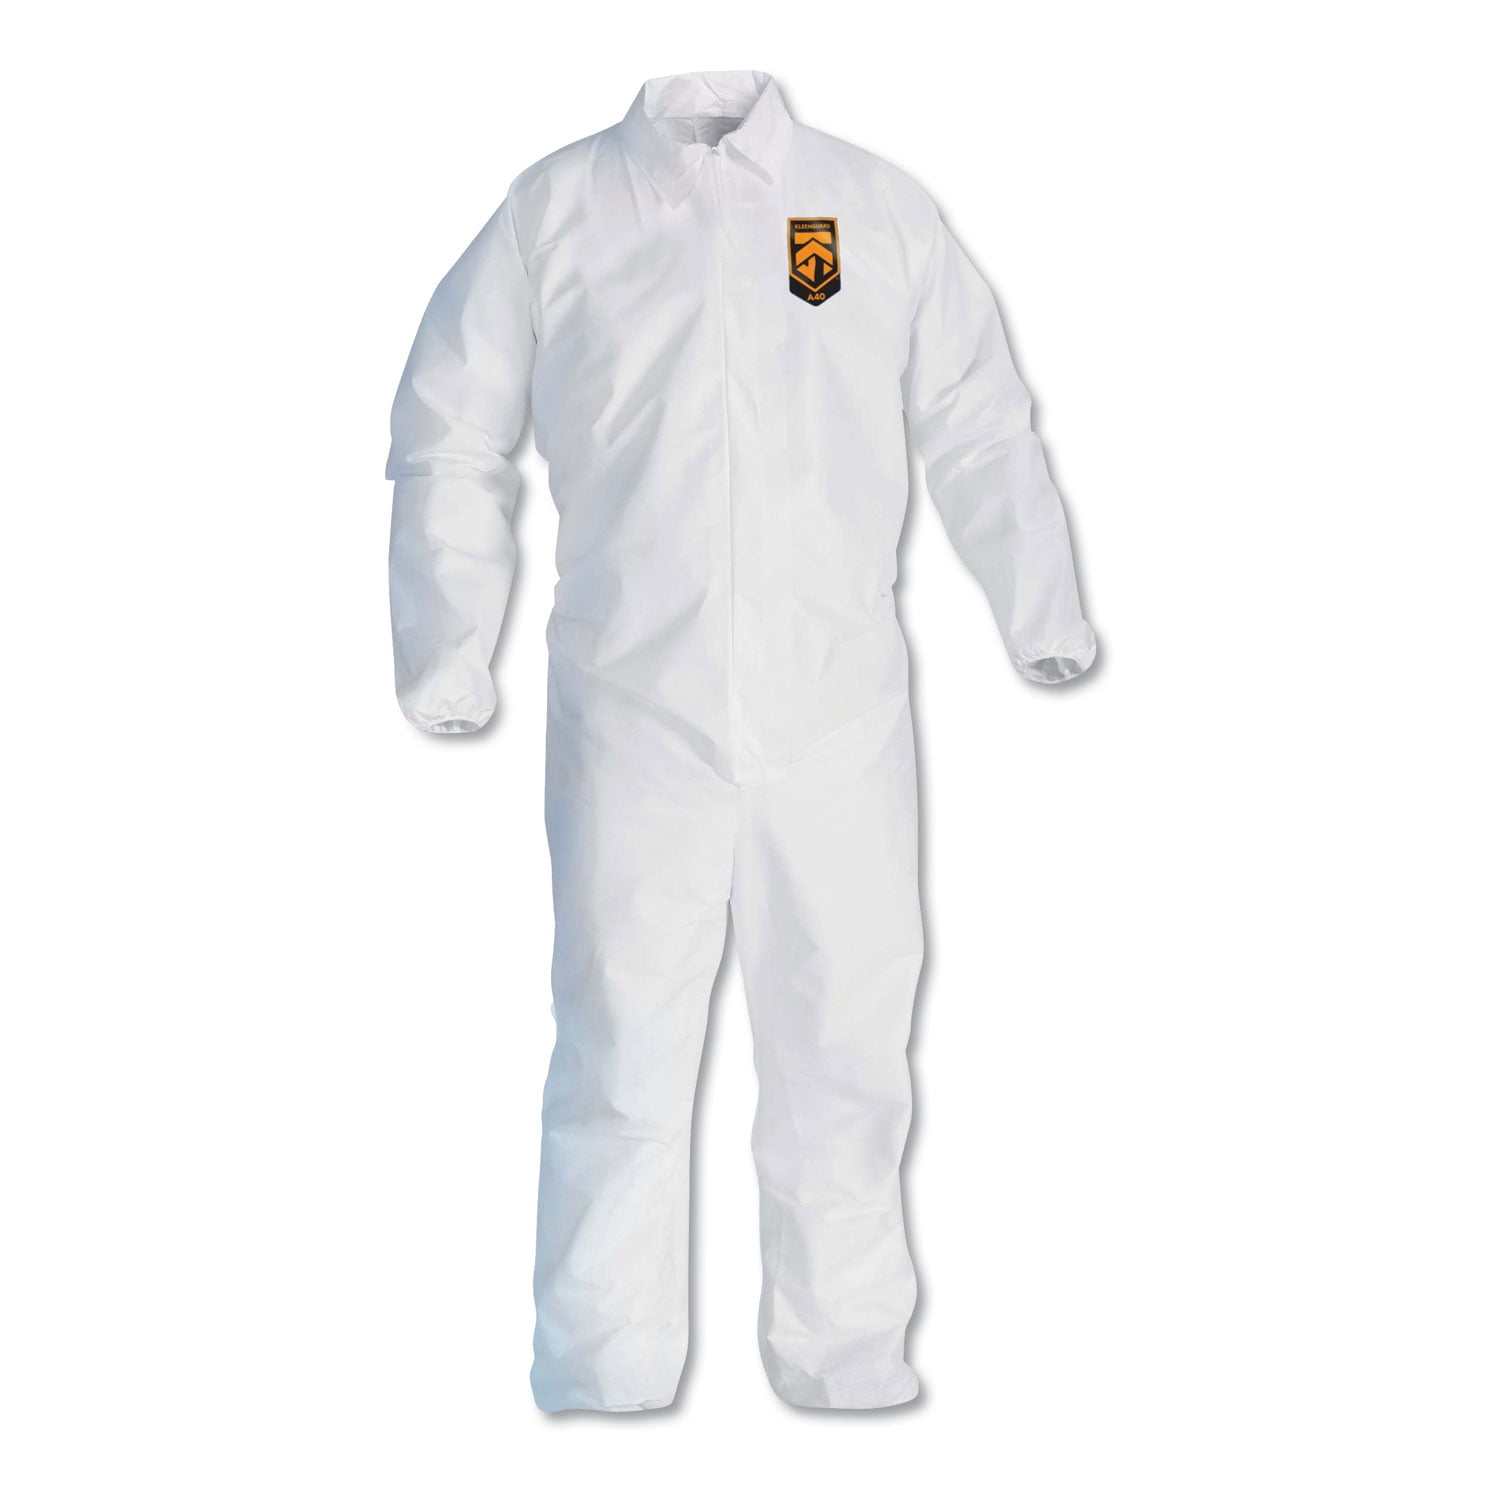 DUPONT TY122S-L TYVEK COVERALLS BUNNY SUIT SOLD EACH 